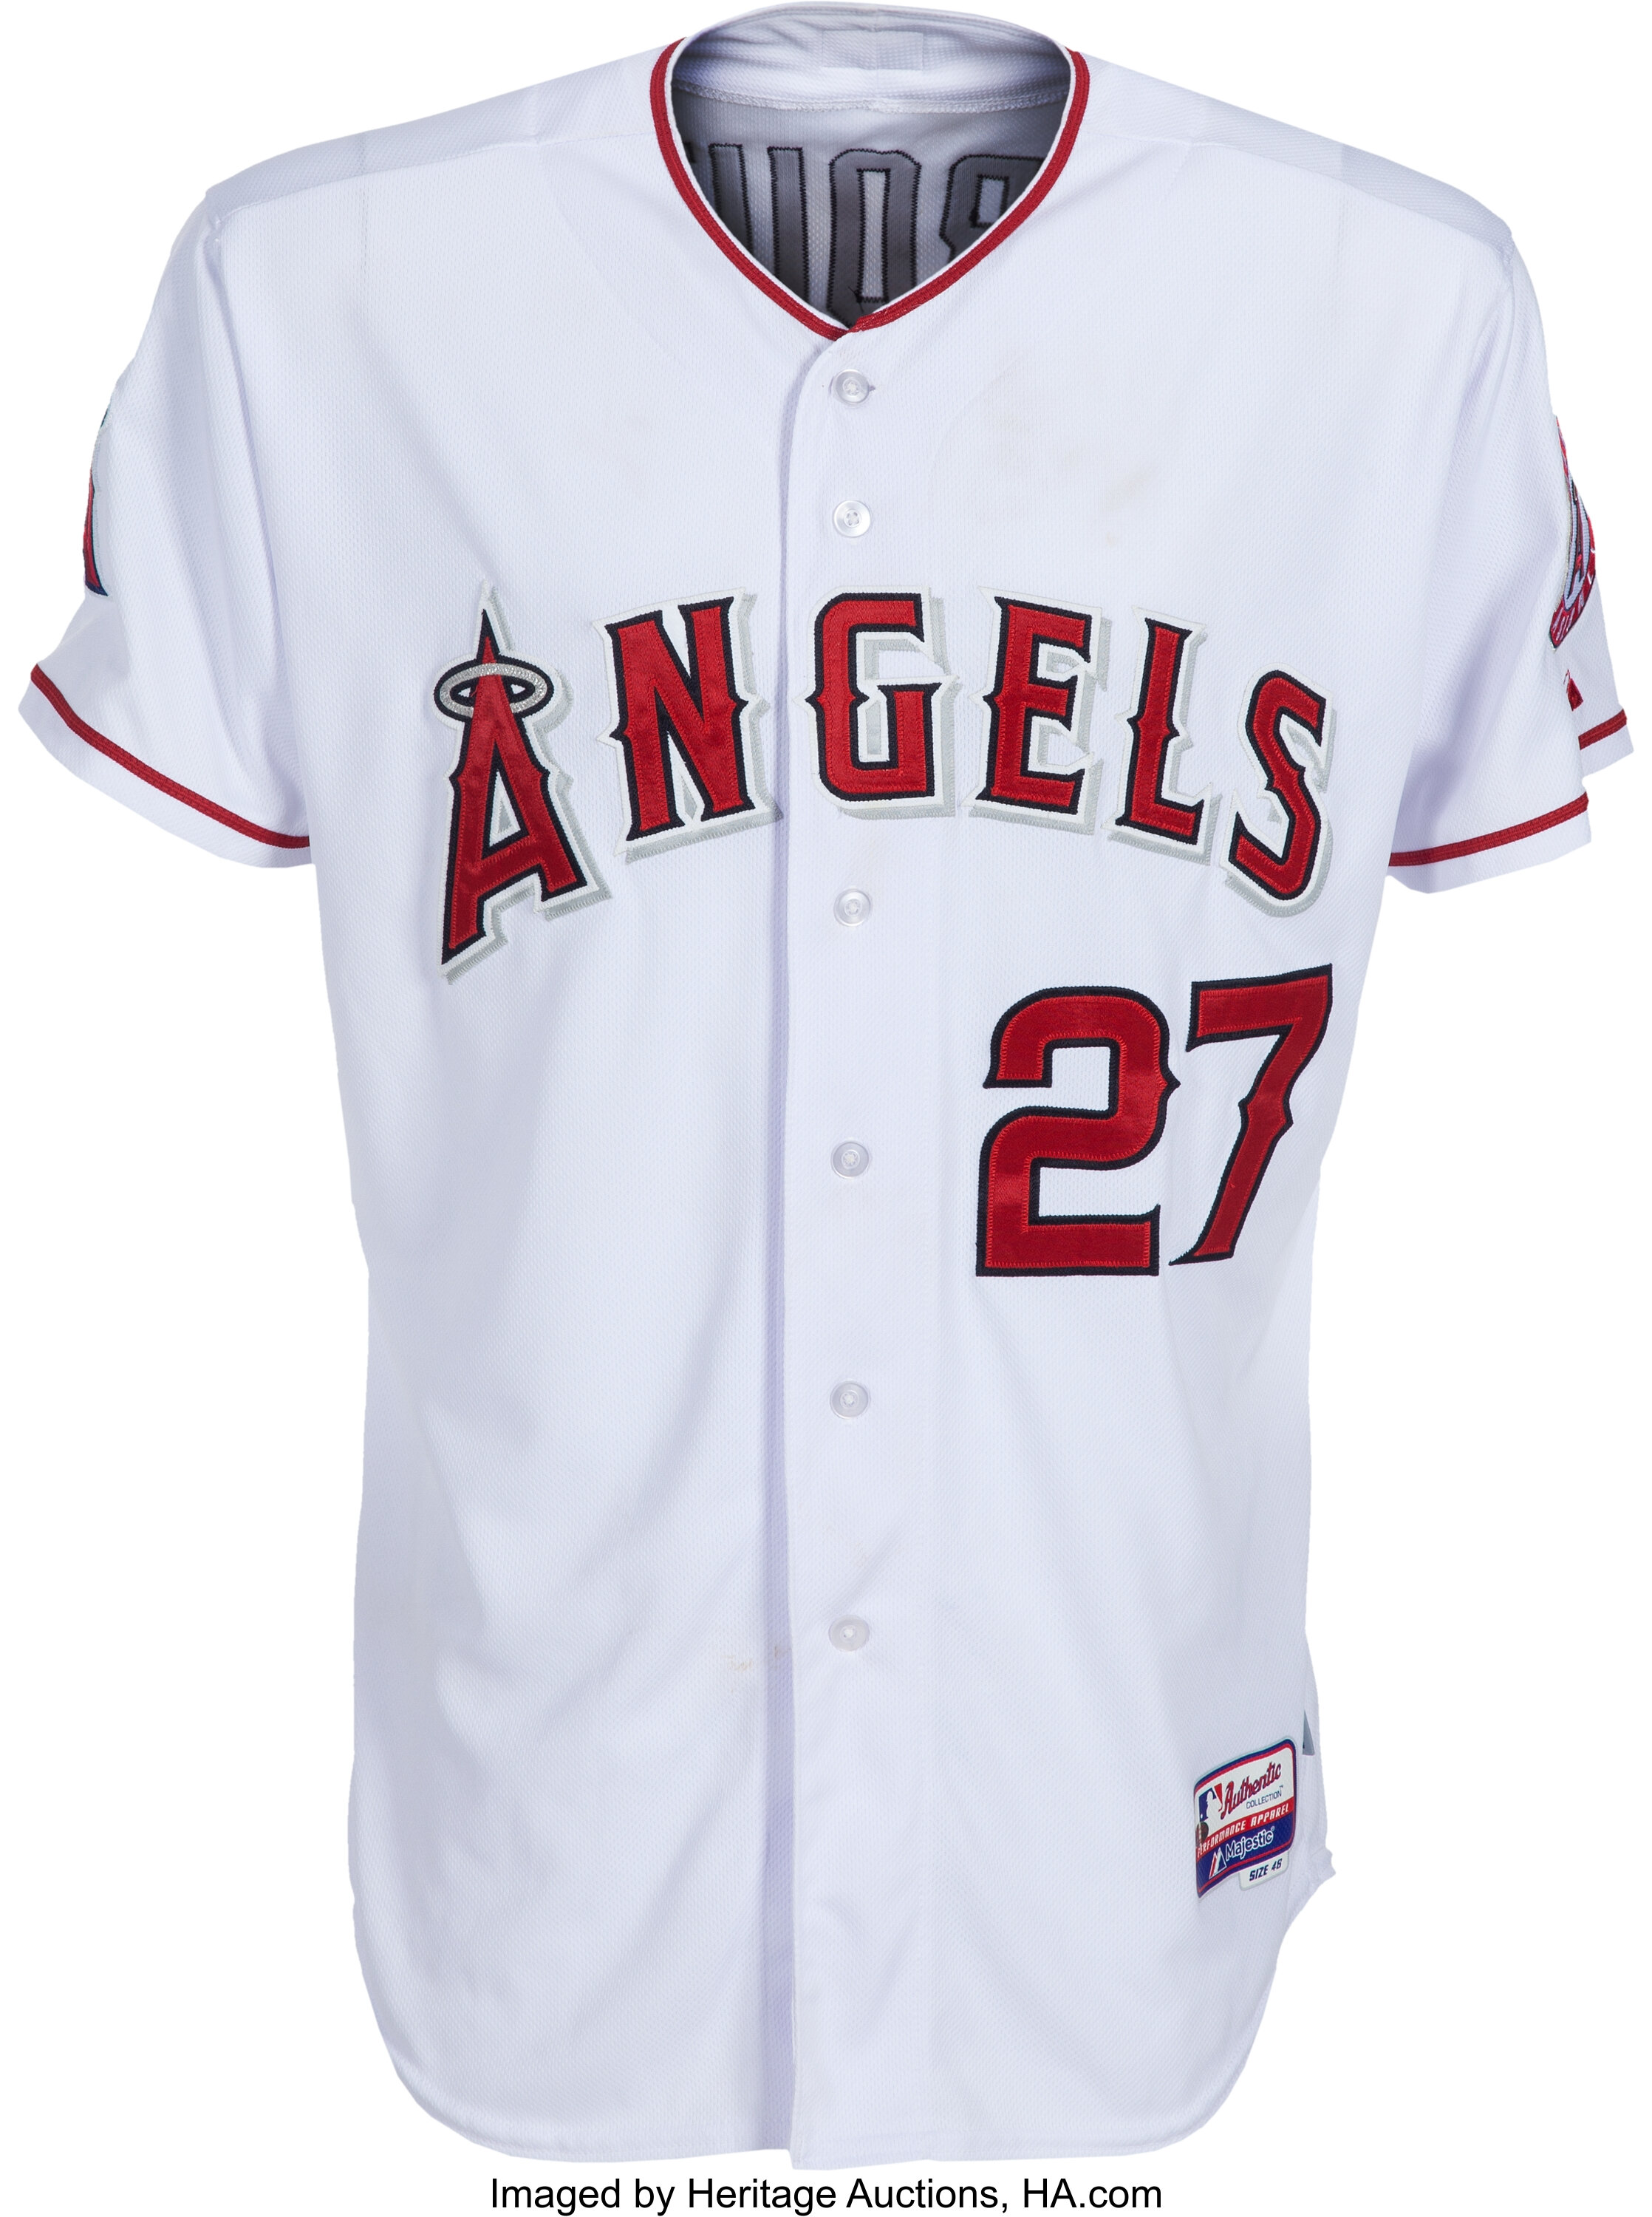 Mike Trout Full Name Autographed Authentic Red Los Angeles Angels Jersey